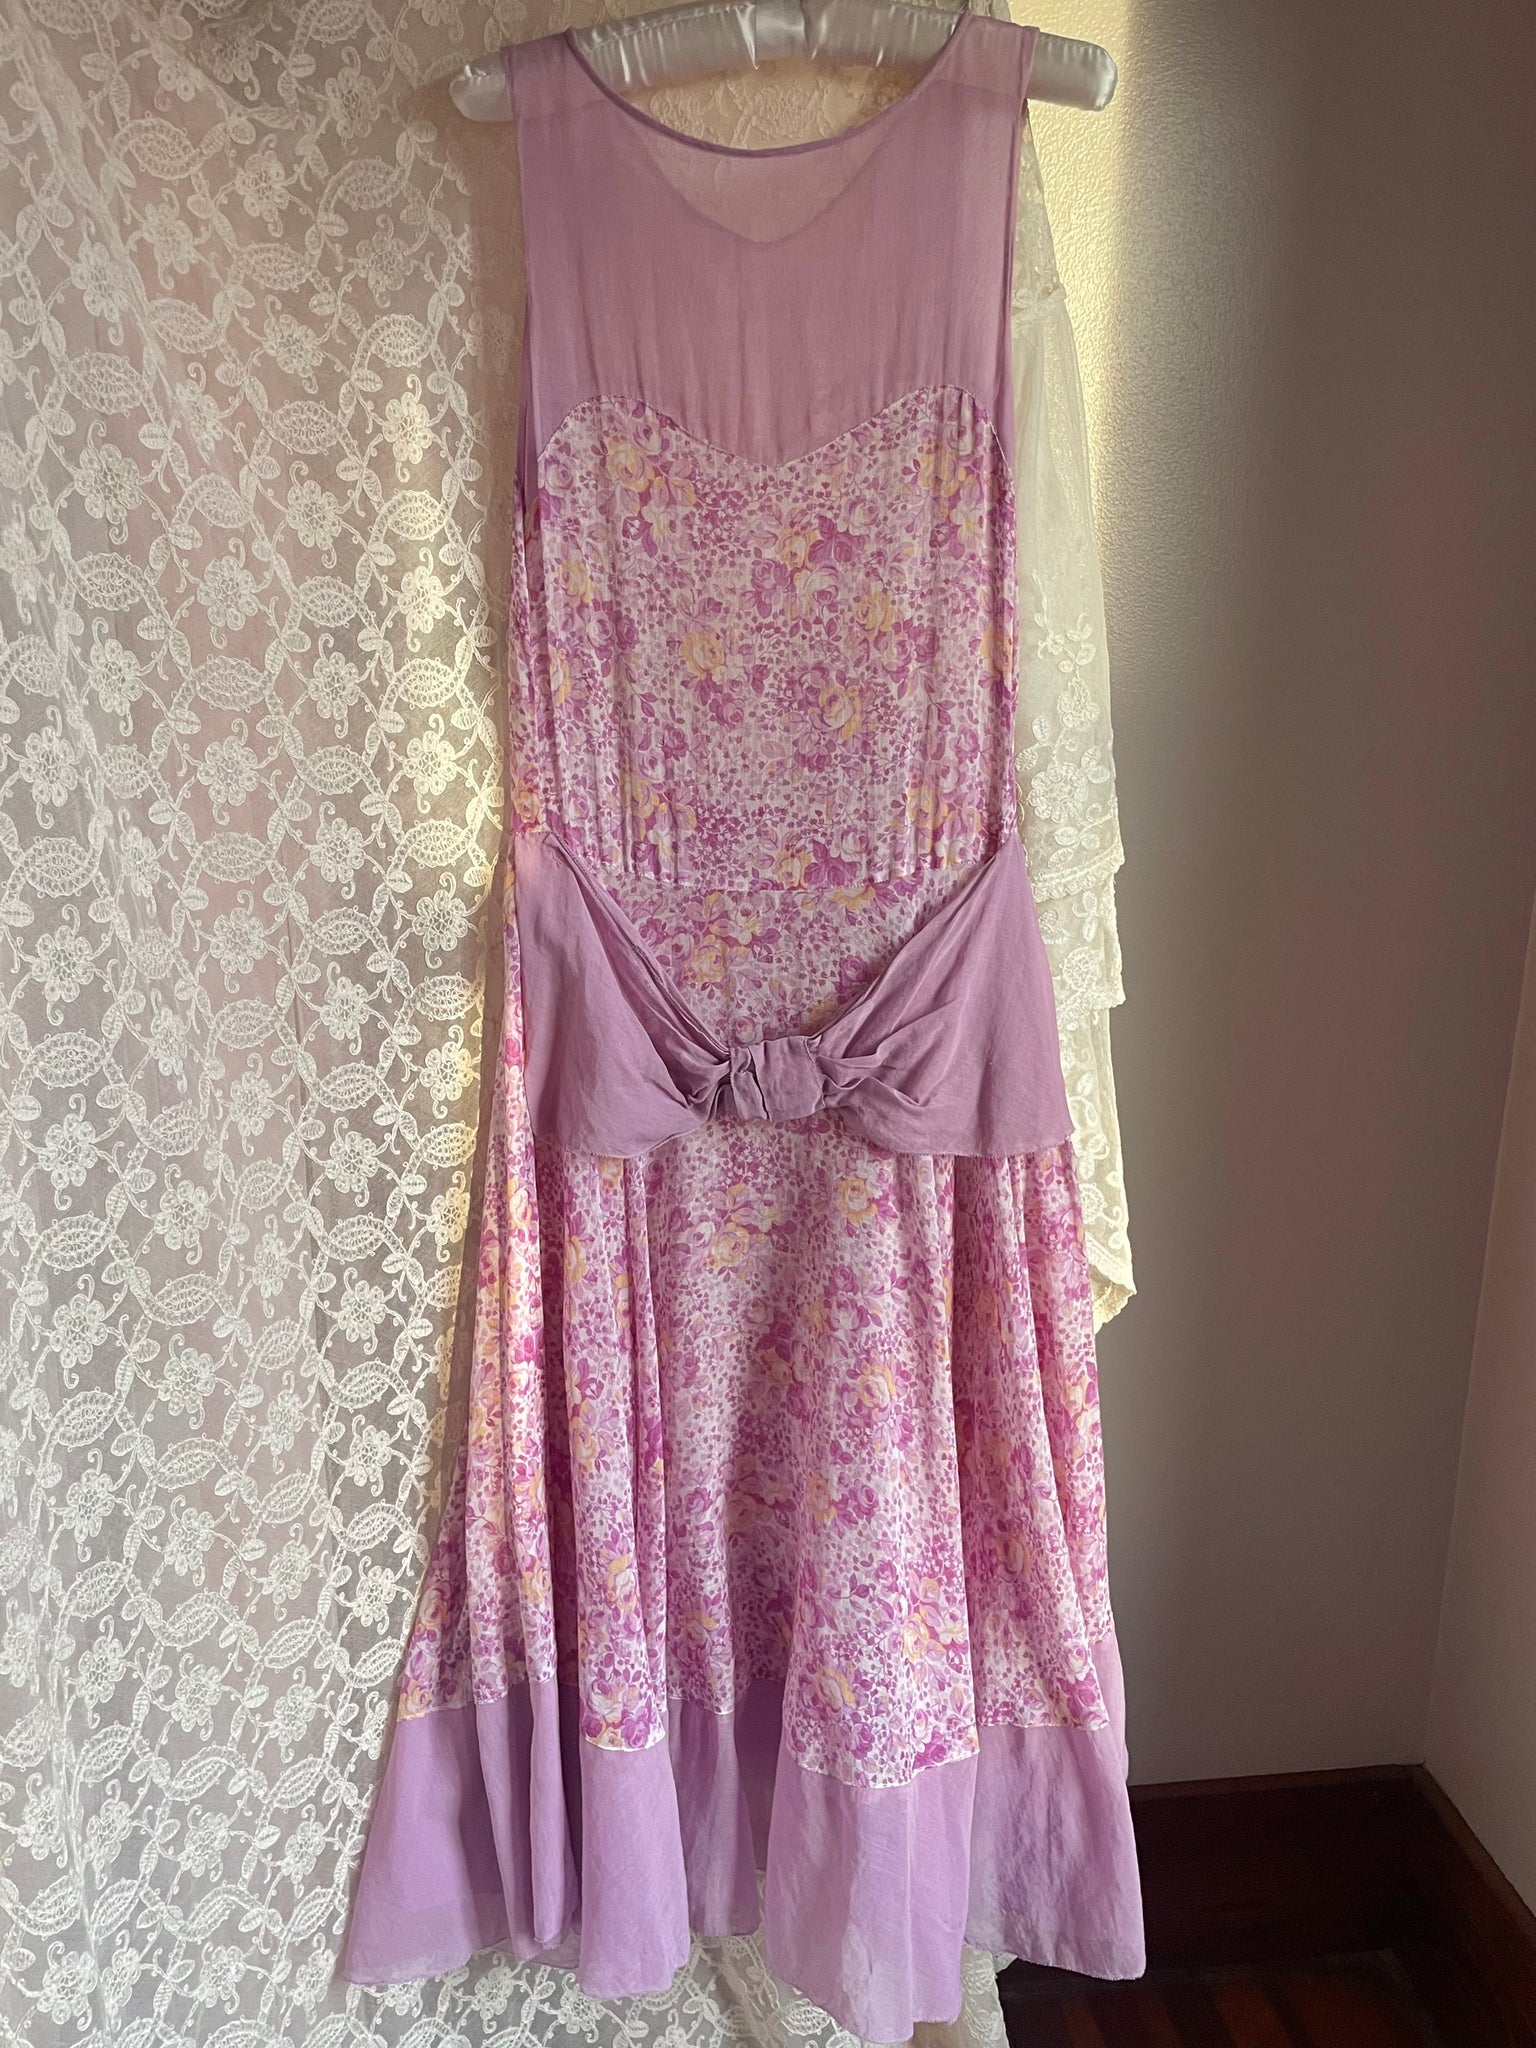 1930s Rose Floral Printed Cotton Bias Cut Dress Gown Bow Purple Yellow